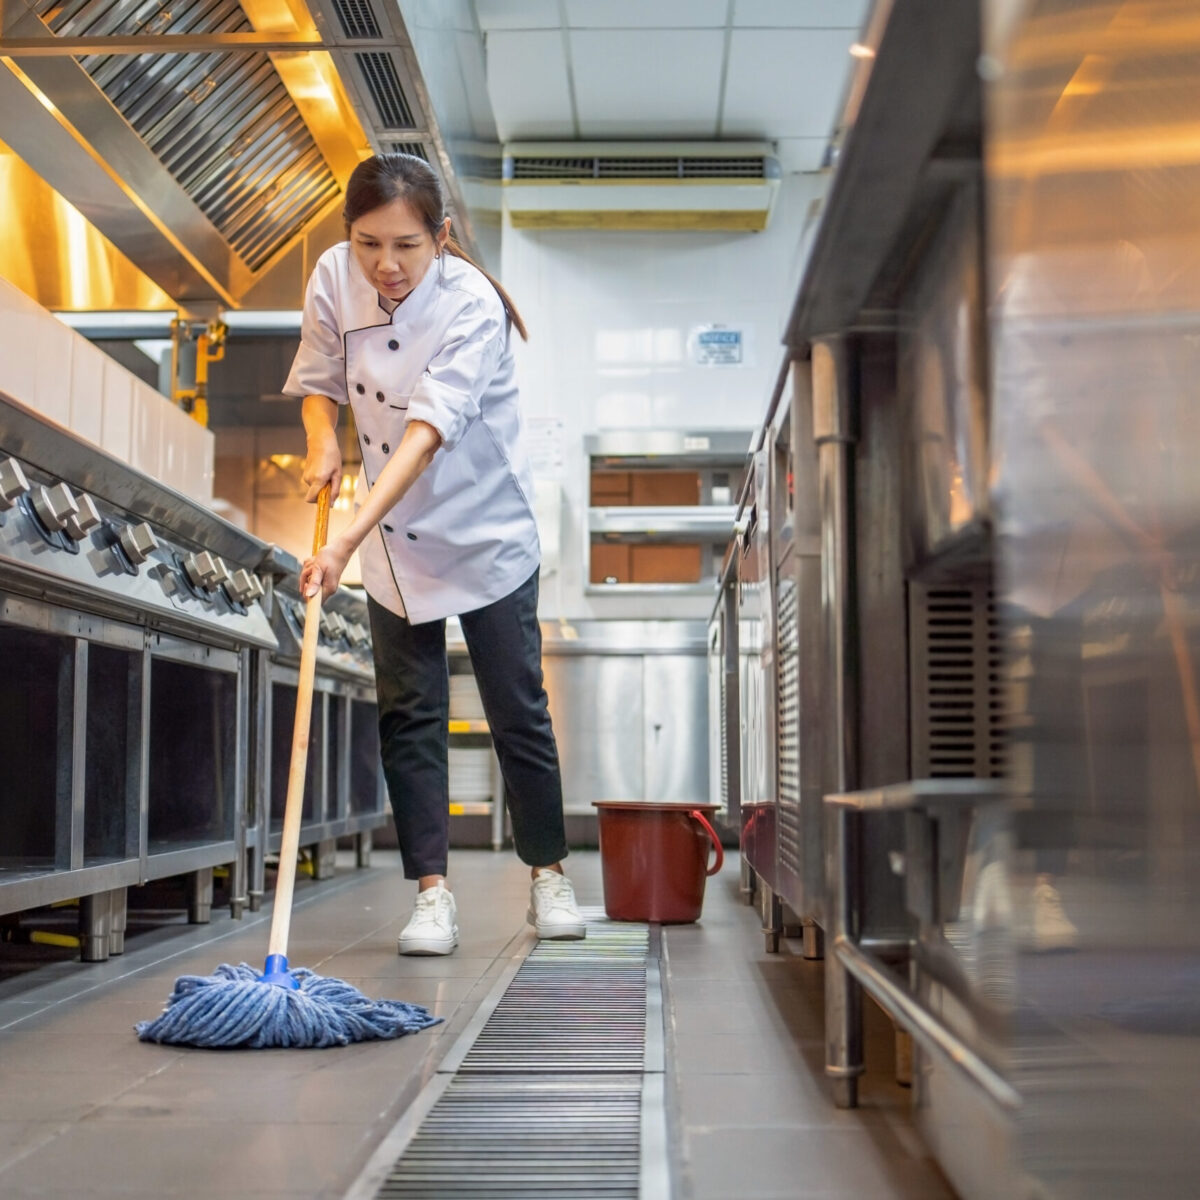 A woman with dark hair in a commercial kitchen. The fixtures are all shiny, steel and she is wearing a chef jacket. She is mopping the floor